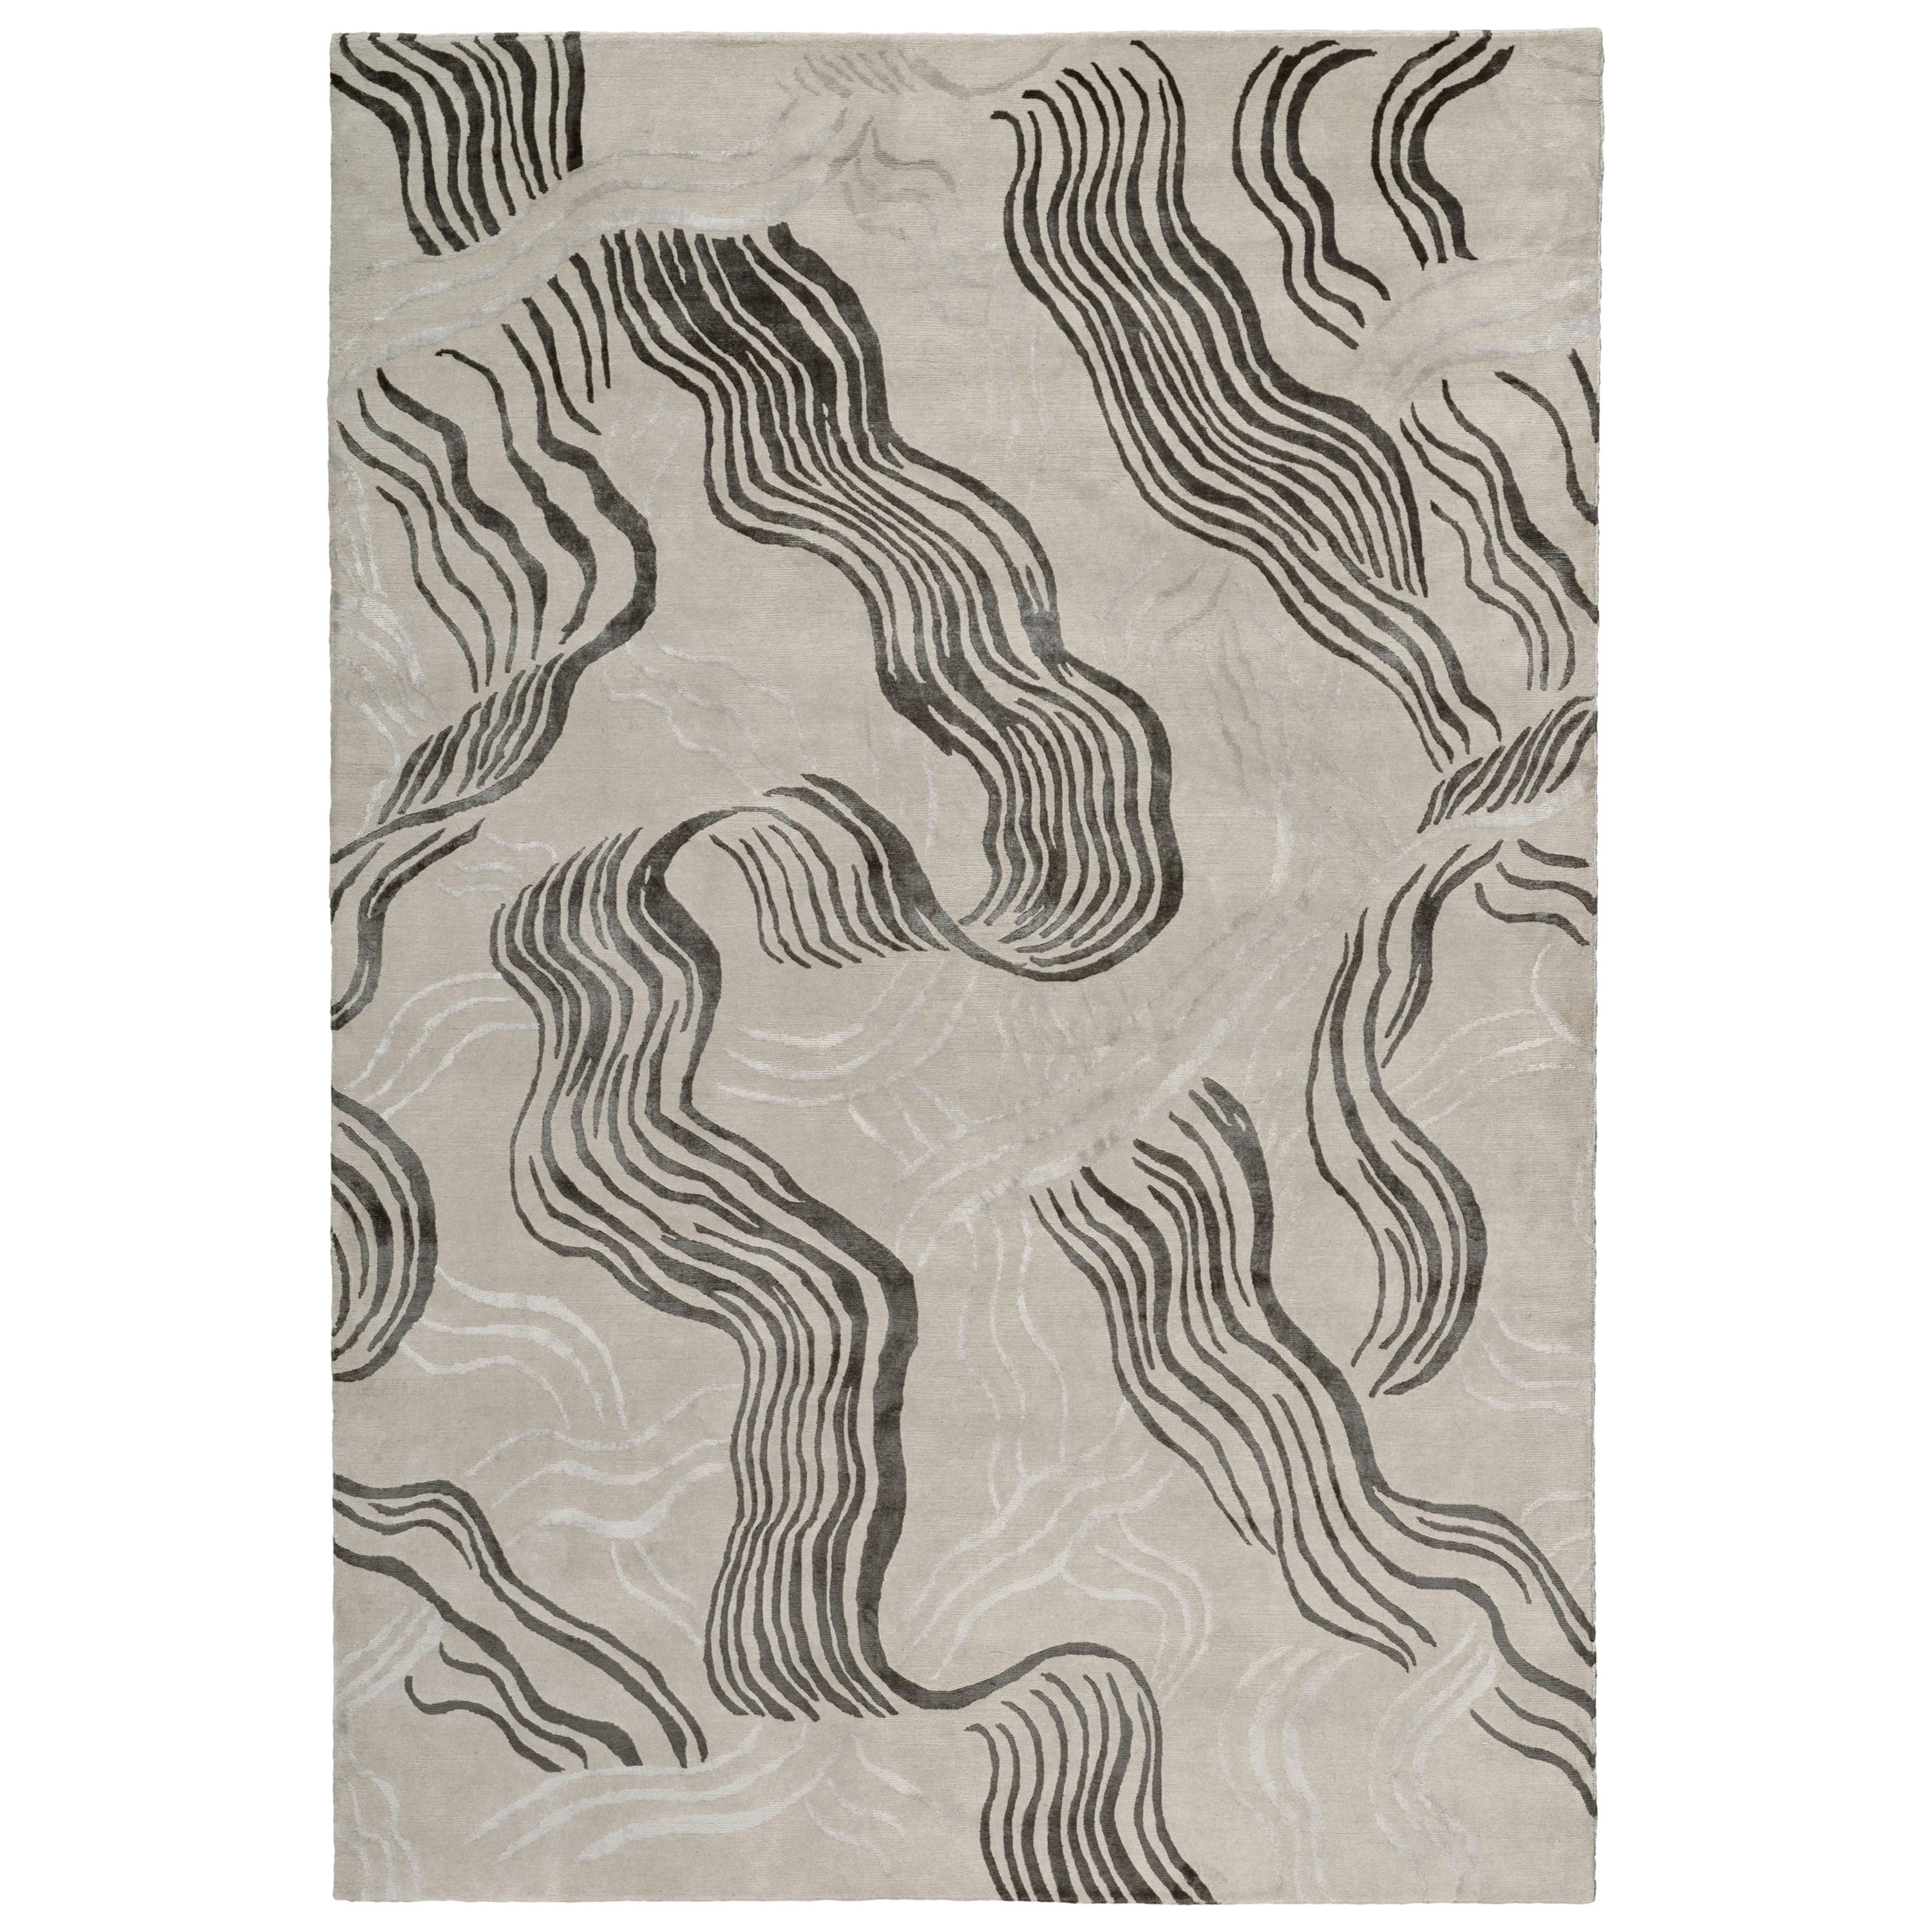 Wake Hand-Knotted 12x9 Rug in Wool and Silk by Kelly Wearstler For Sale